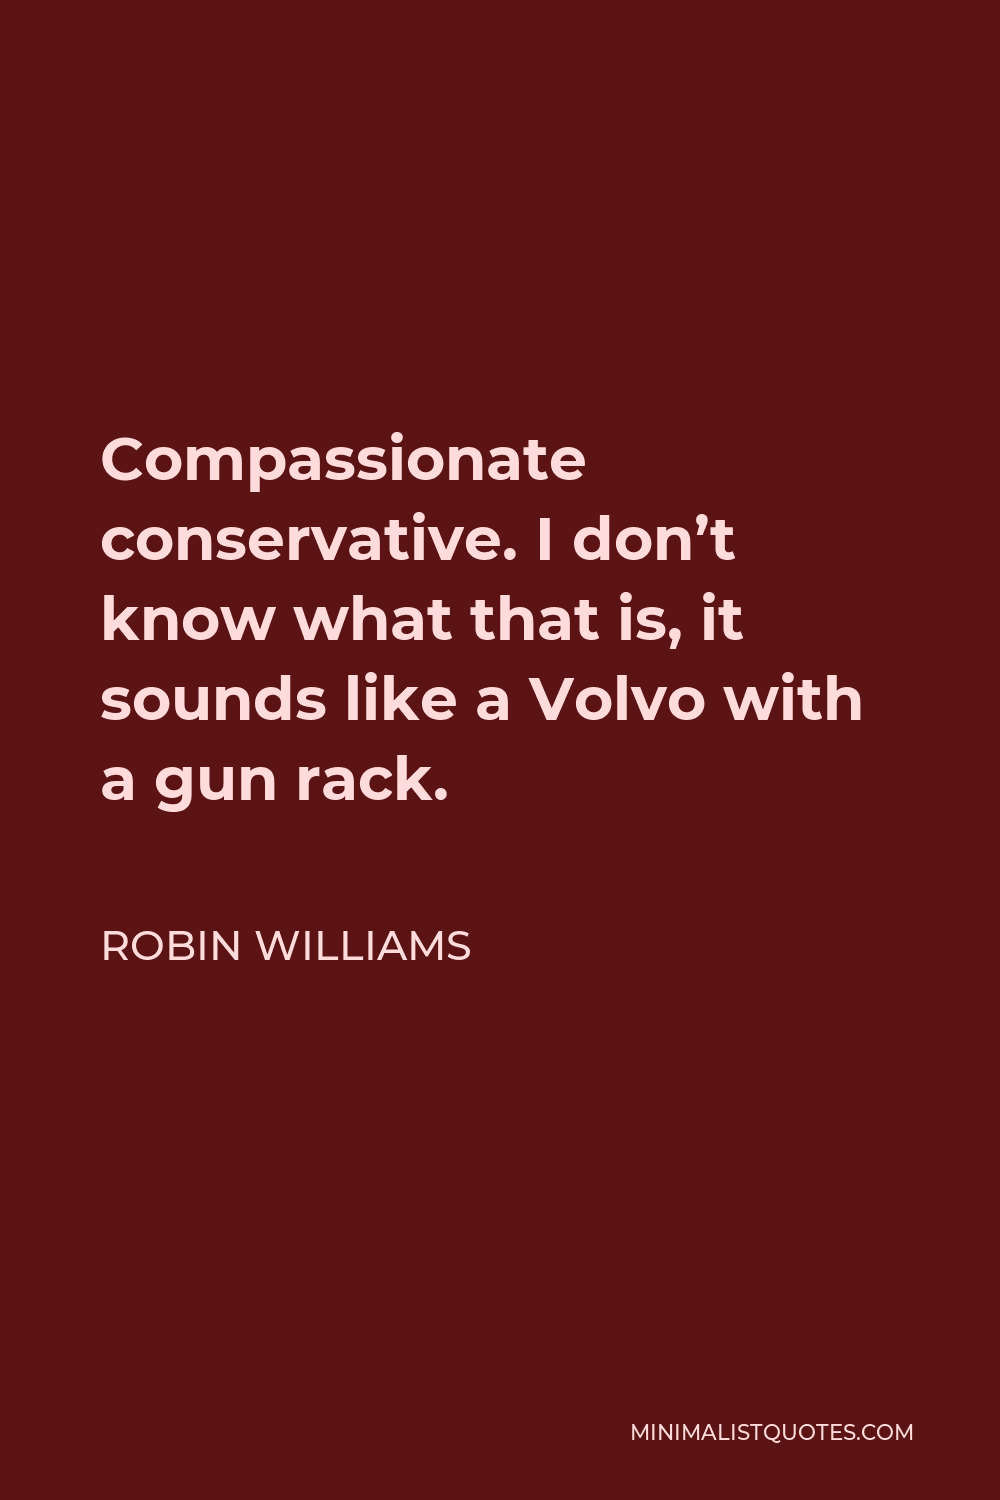 Robin Williams Quote - Compassionate conservative. I don’t know what that is, it sounds like a Volvo with a gun rack.